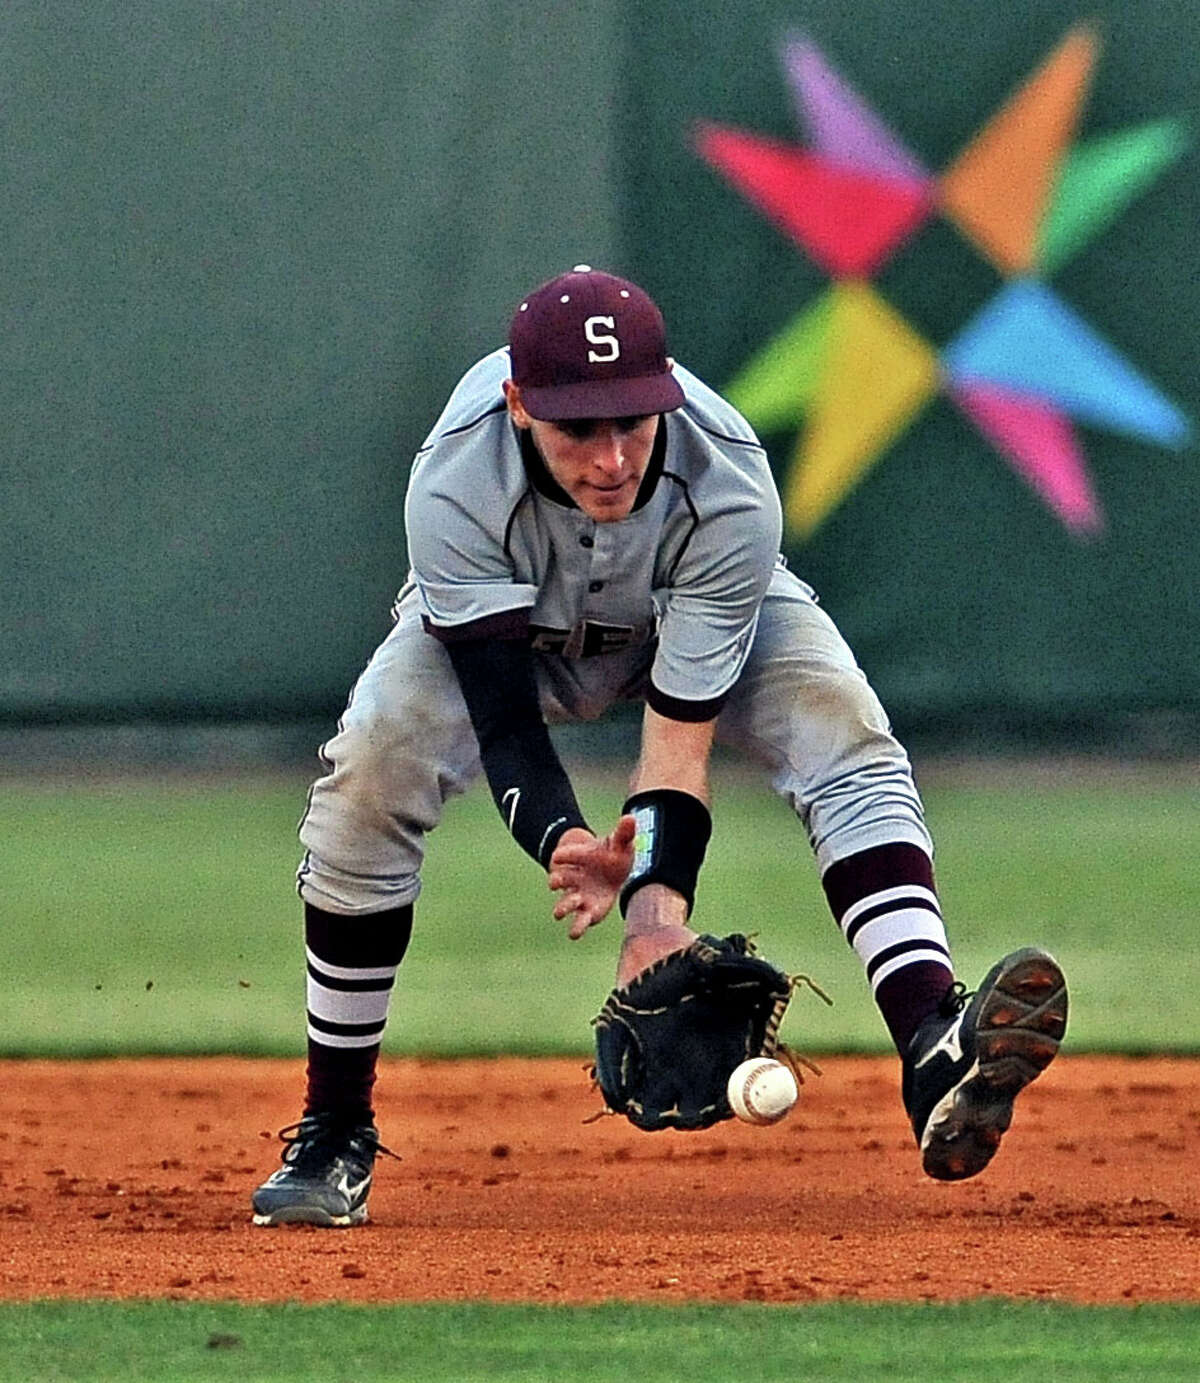 Silsbee second baseman Jordan Gore, #5, fields a ground ball during the Silsbee High School district baseball game against Diboll High School at the University of Houston on Thursday, May 30, 2013. Photo taken: Randy Edwards/The Enterprise